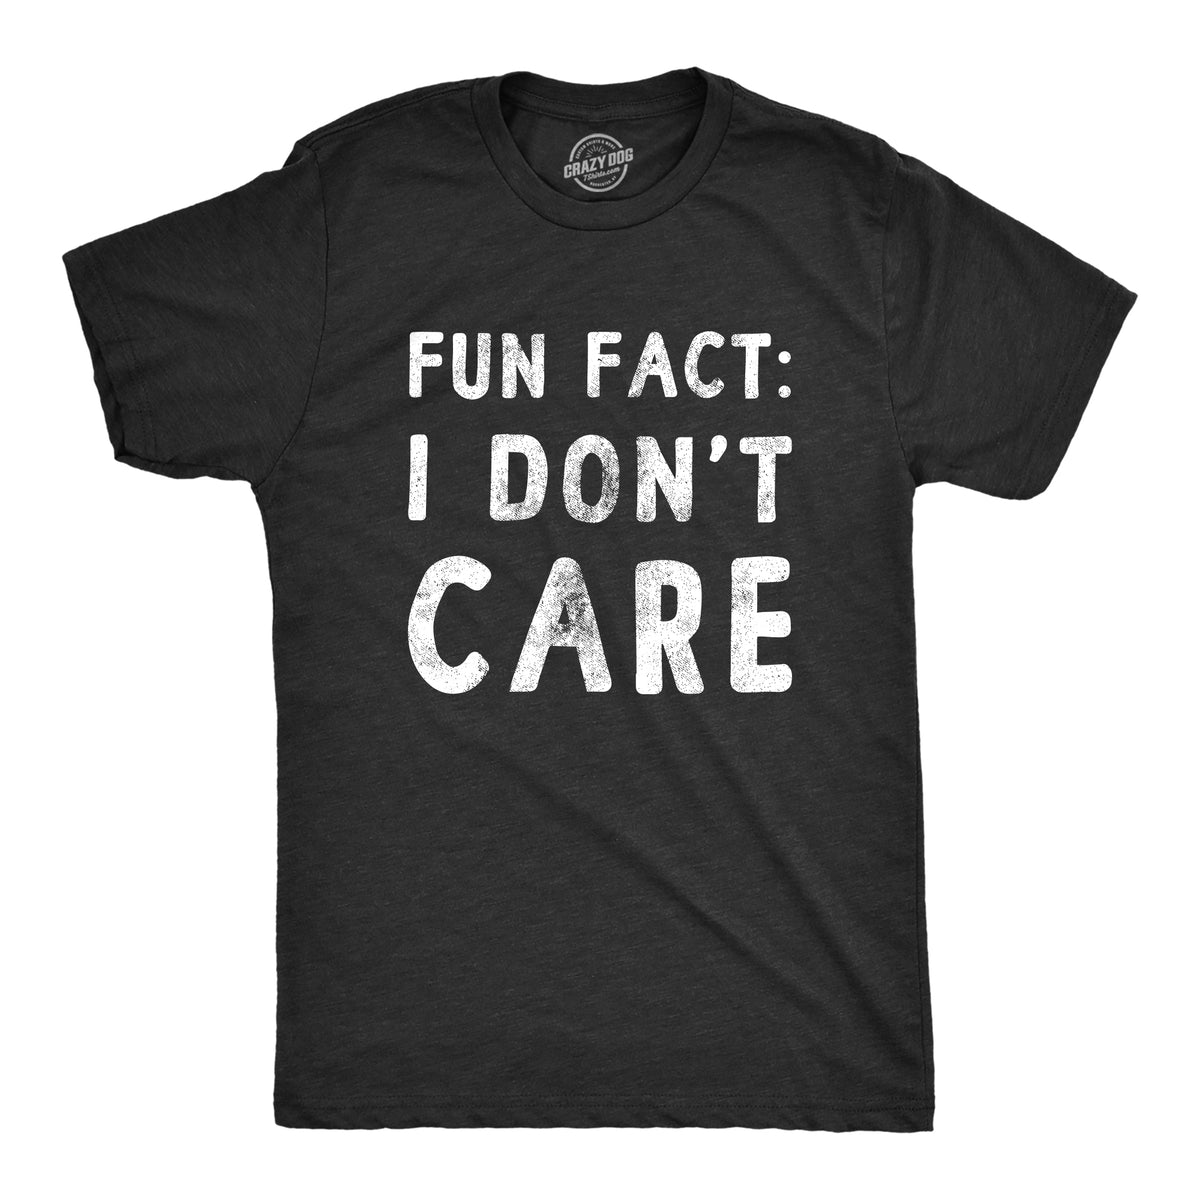 Funny Heather Black Fun Fact I Don’t Care Mens T Shirt Nerdy Introvert Tee